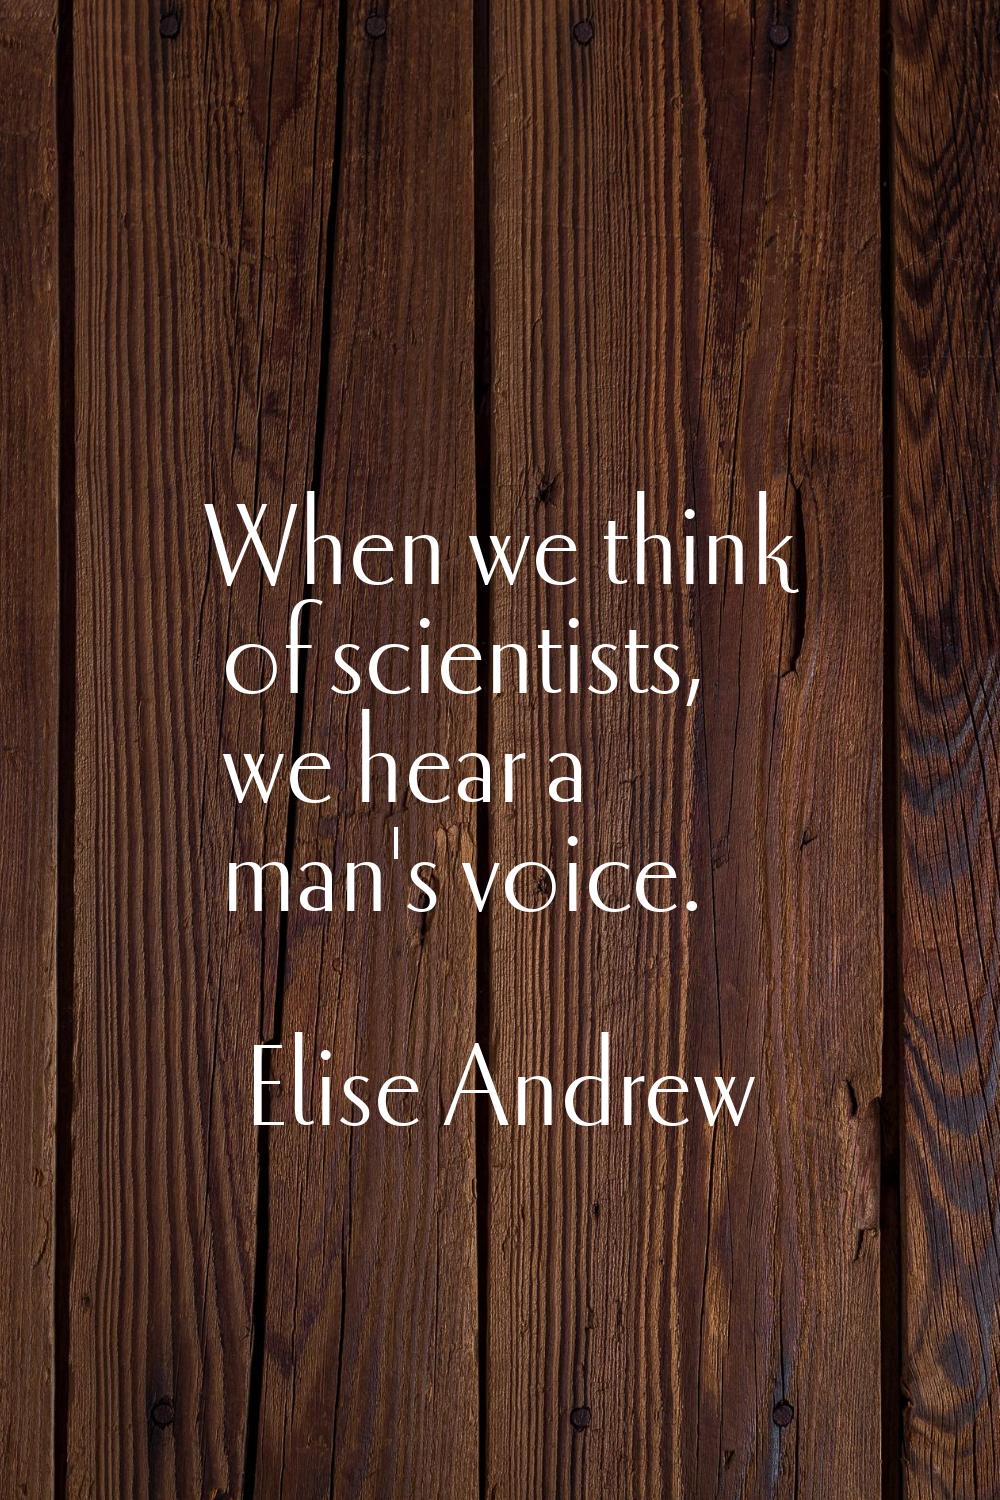 When we think of scientists, we hear a man's voice.